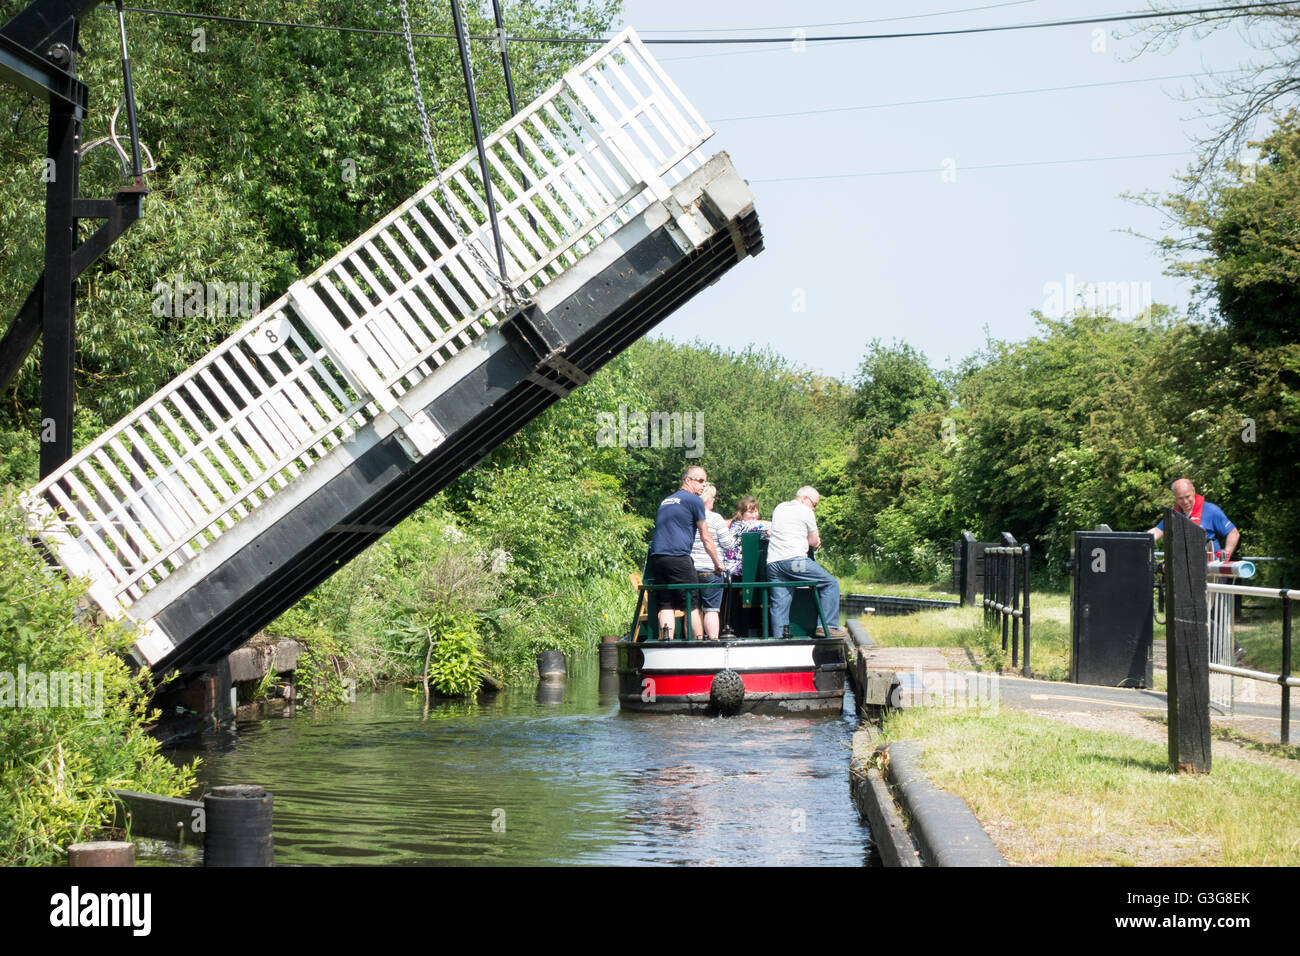 Shirley swing Bridge, which is commonly called a canal lift bridge, on the North Stratford Canal Stock Photo